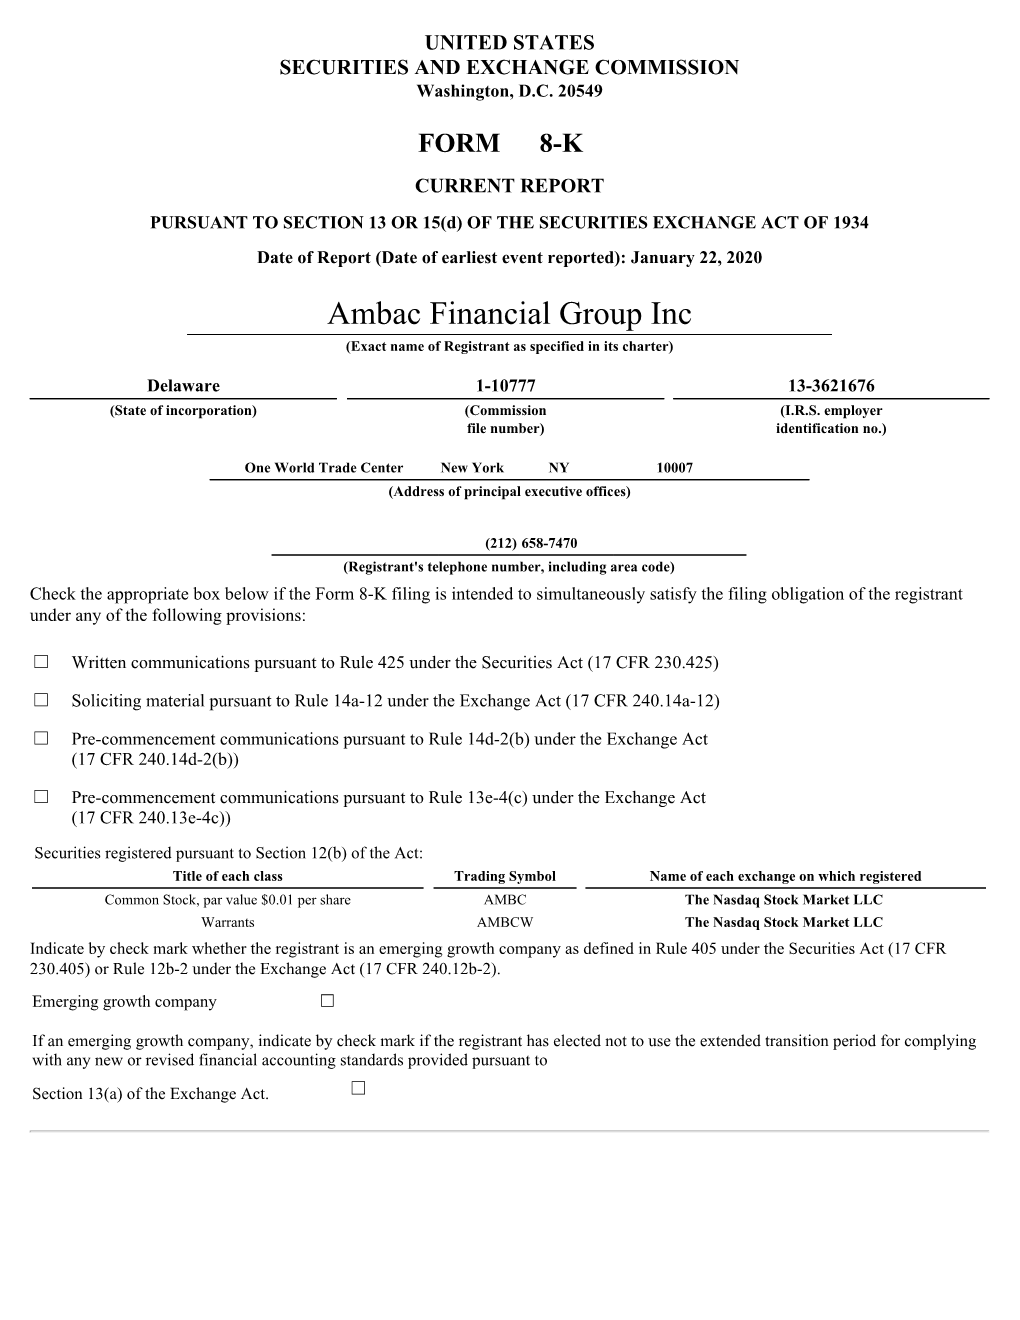 Ambac Financial Group Inc (Exact Name of Registrant As Specified in Its Charter)